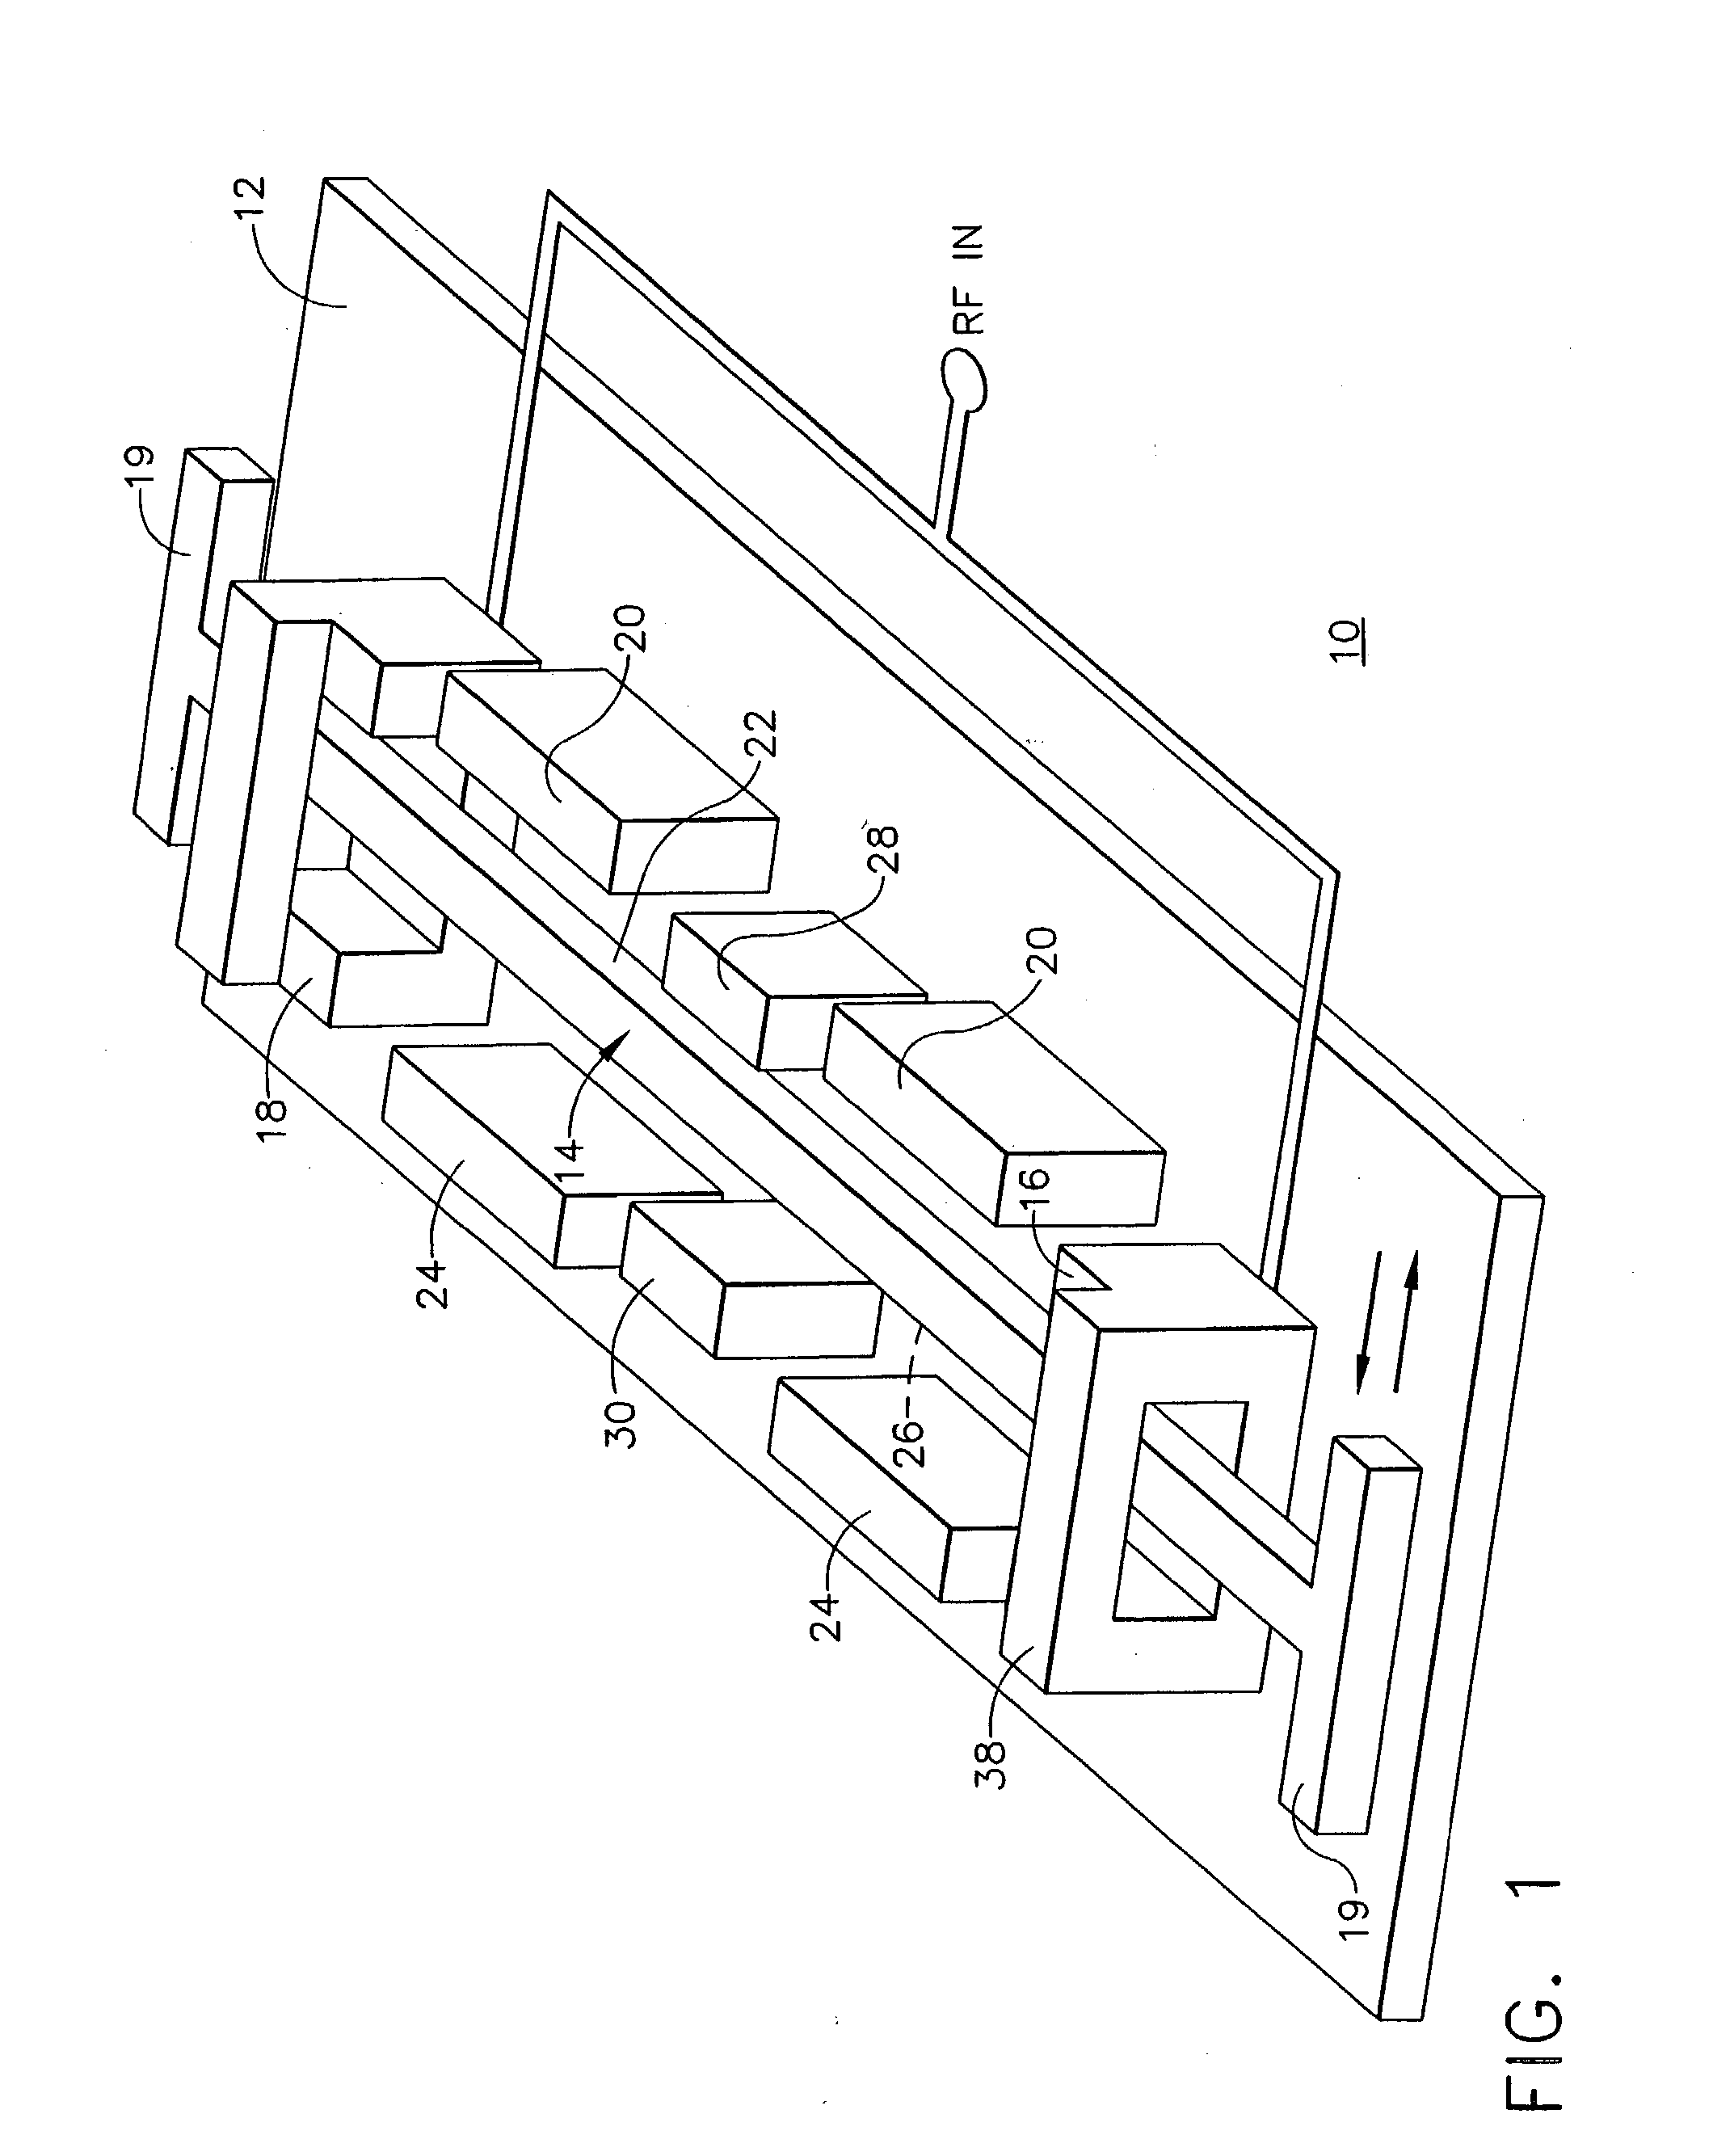 Anchorless electrostatically activated micro electromechanical system switch